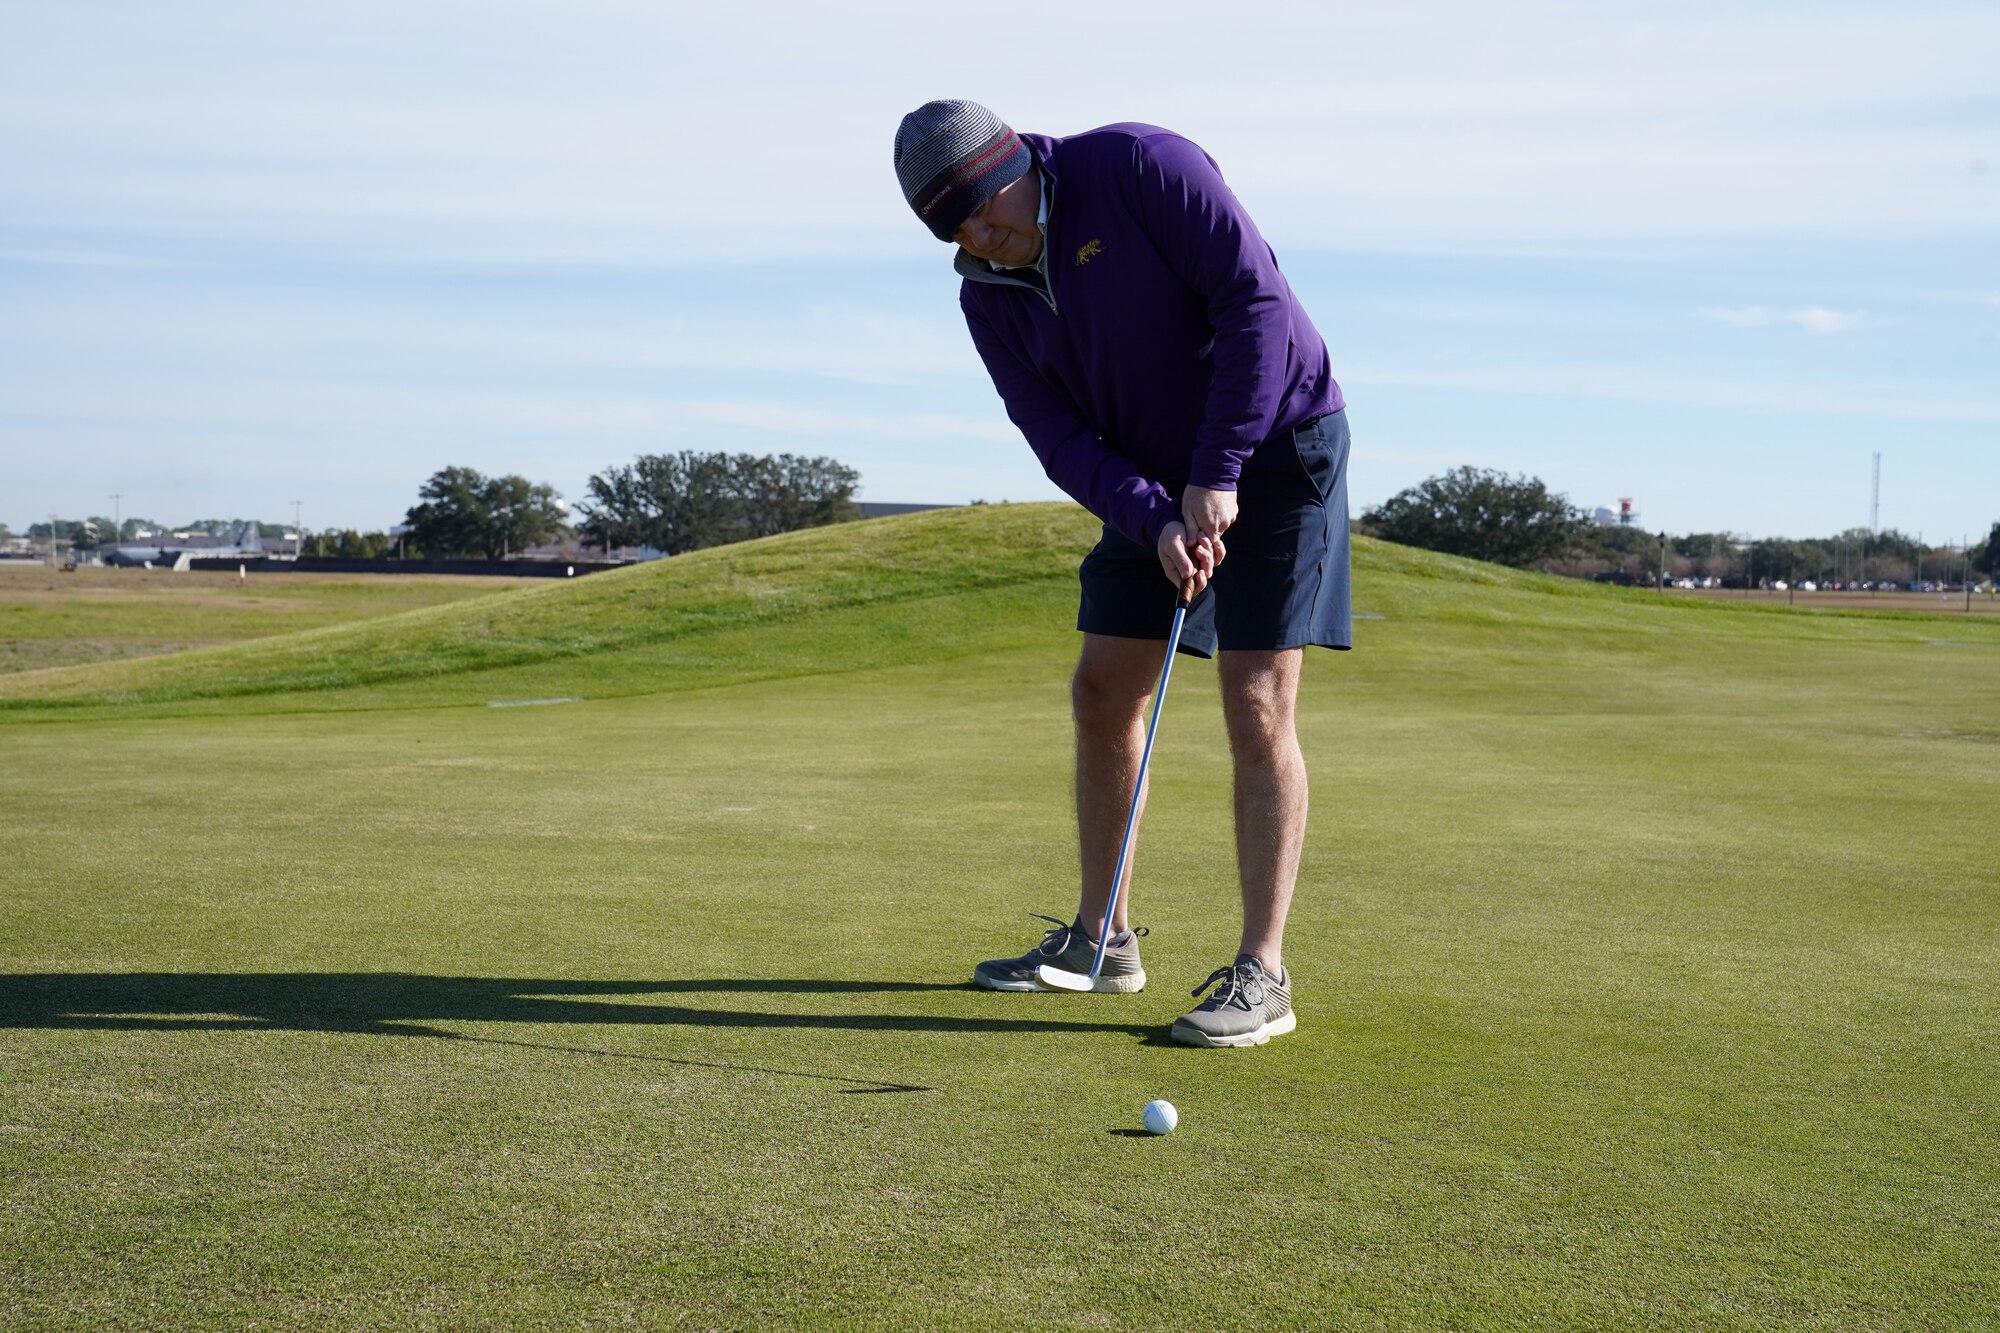 U.S. Air Force Lt. Col. Jacob Simpson, 81st Training Wing Individual Mobilization Augmentee to the Staff Judge Advocate, putts during the Combined Federal Campaign Closeout Golf Scramble at the Bay Breeze Golf Course on Keesler Air Force Base, Mississippi, Jan. 14, 2021. Keesler held a closeout golf scramble for golf enthusiasts on base and in the community to raise money and celebrate the campaign. (U.S. Air Force photo by Senior Airman Seth Haddix)